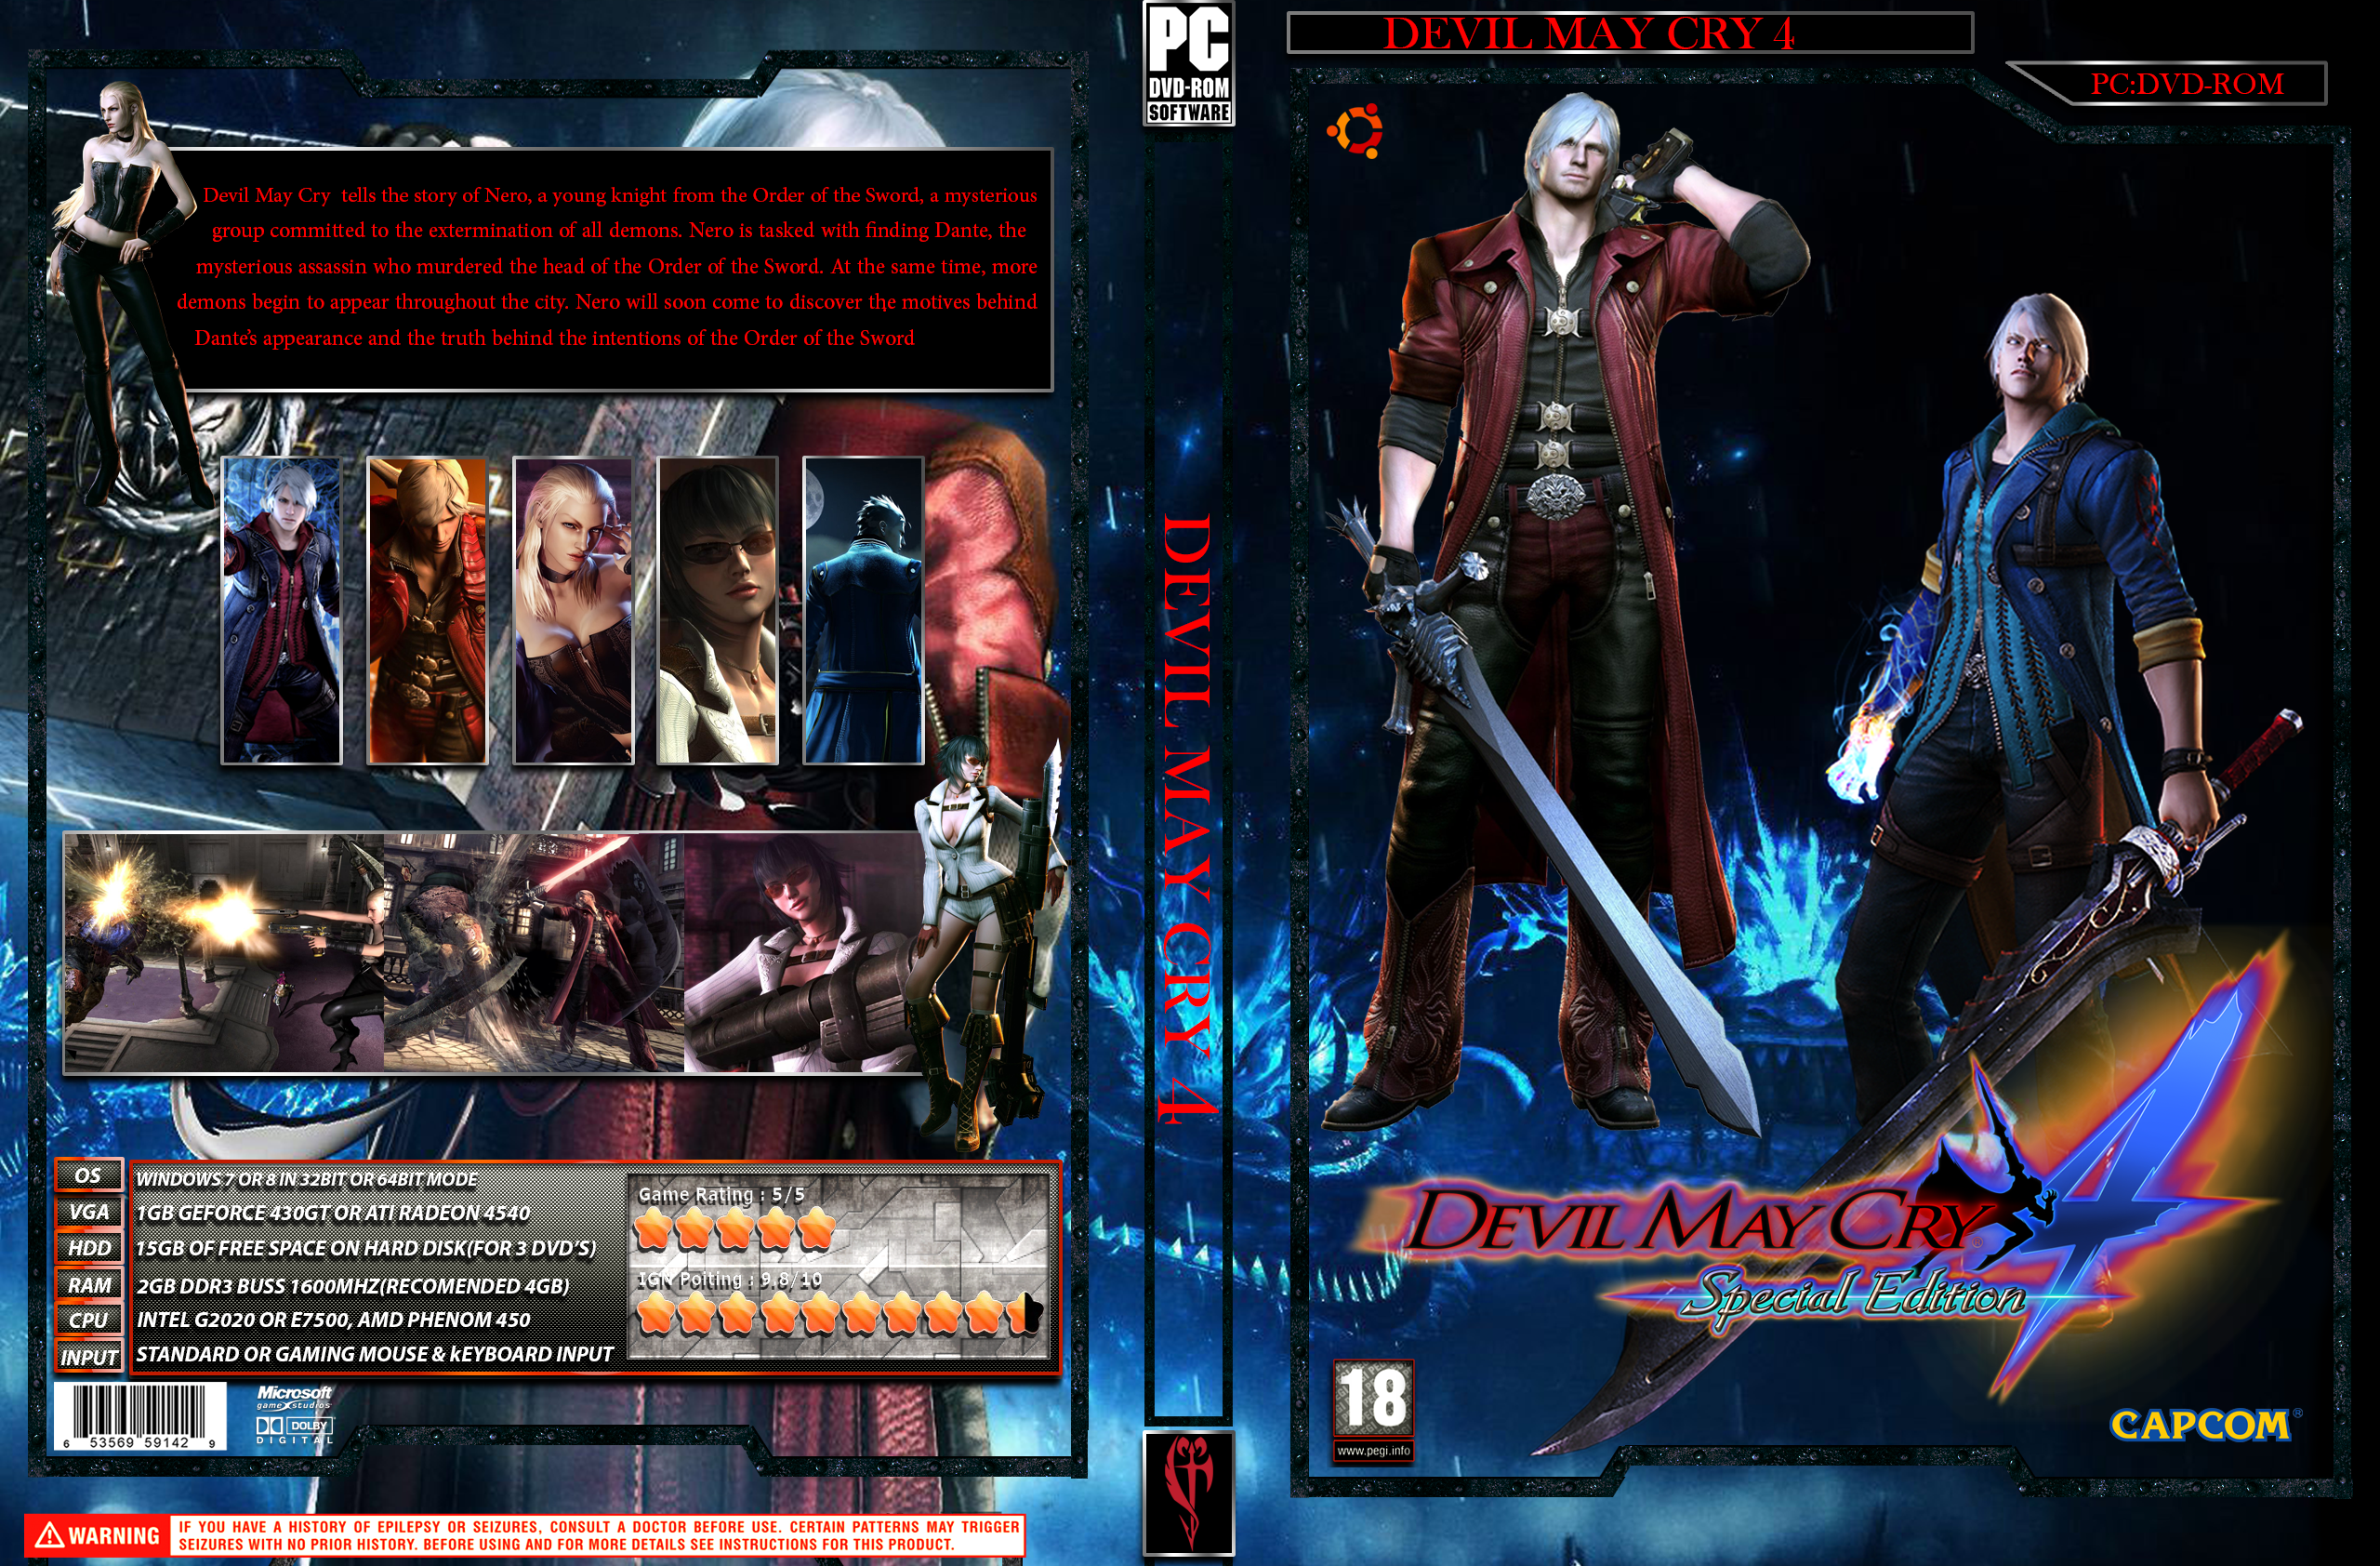 Devil May Cry 4 Special Edition box cover